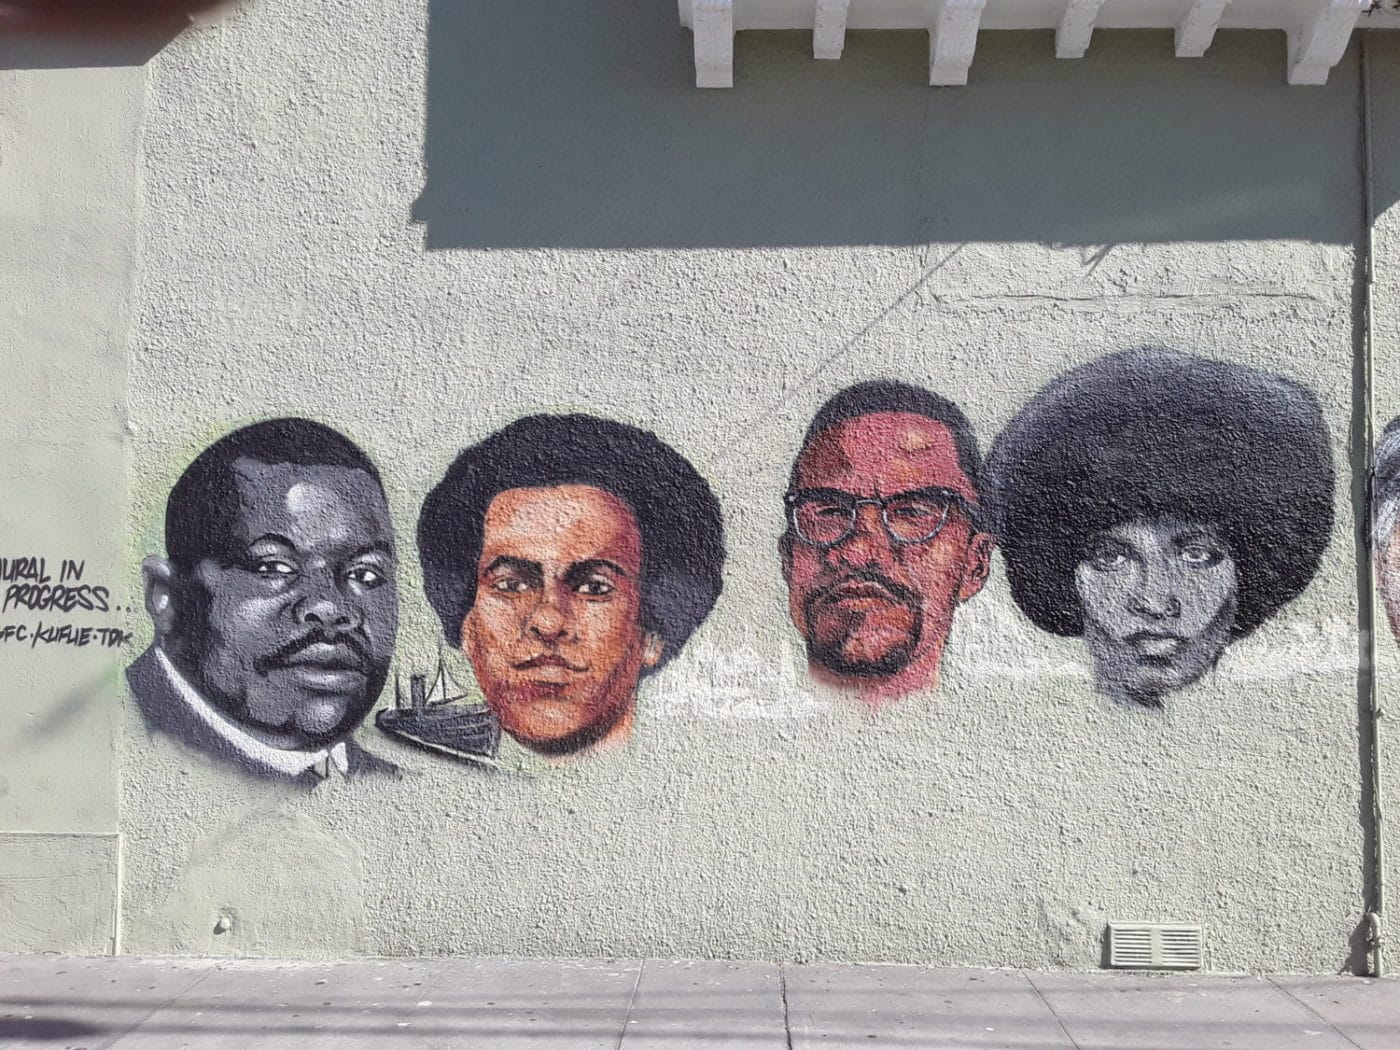 Kufu-mural-87th-International-Oakland-Marcus-Garvey-Huey-P.-Newton-Malcolm-X-Angela-Davis-0720-1400x1050, Black muralist Kufu attacks the walls of East Oakland to show us our fighting heart and soul, Culture Currents 